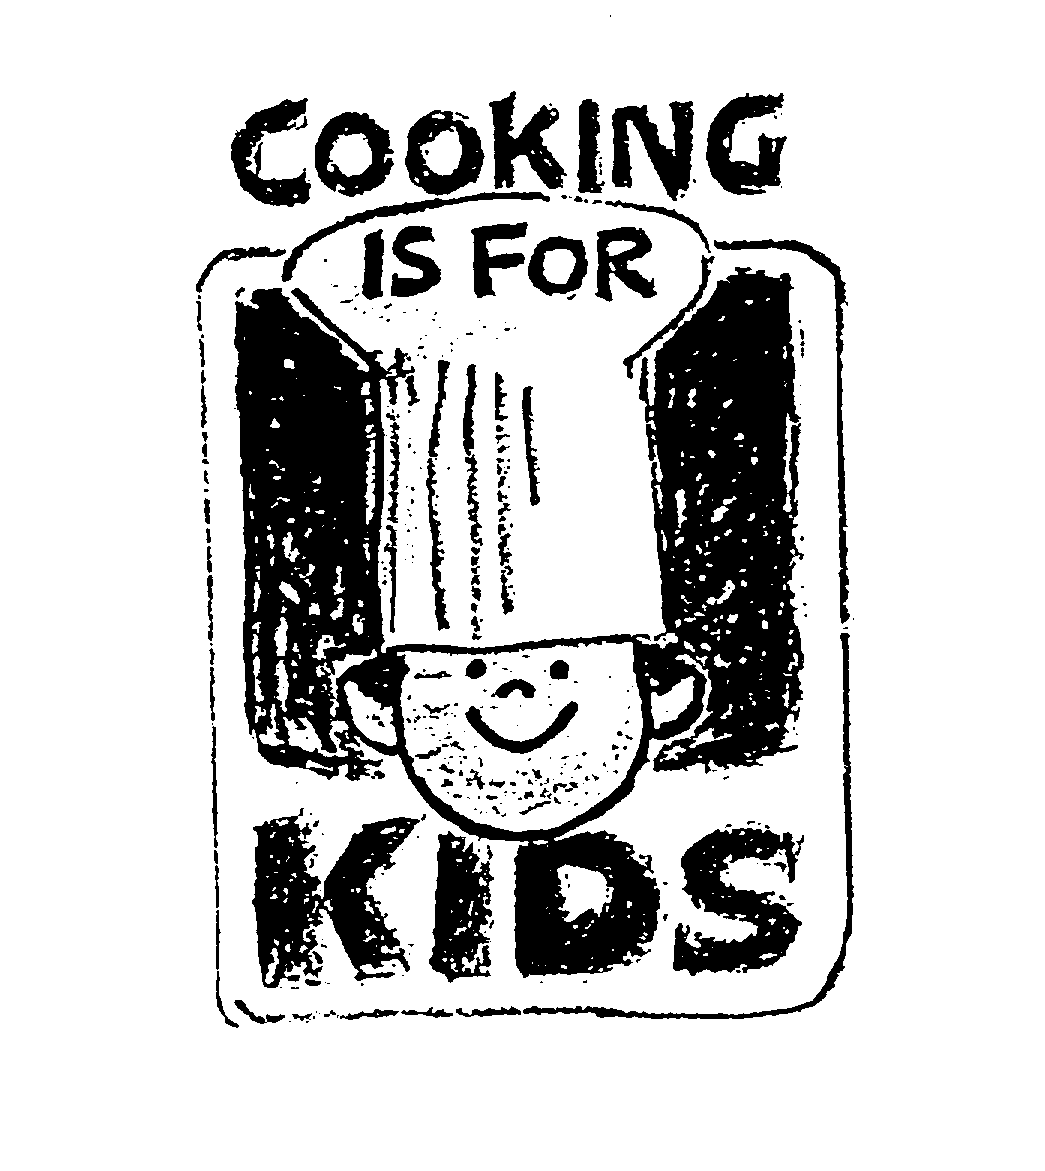  COOKING IS FOR KIDS